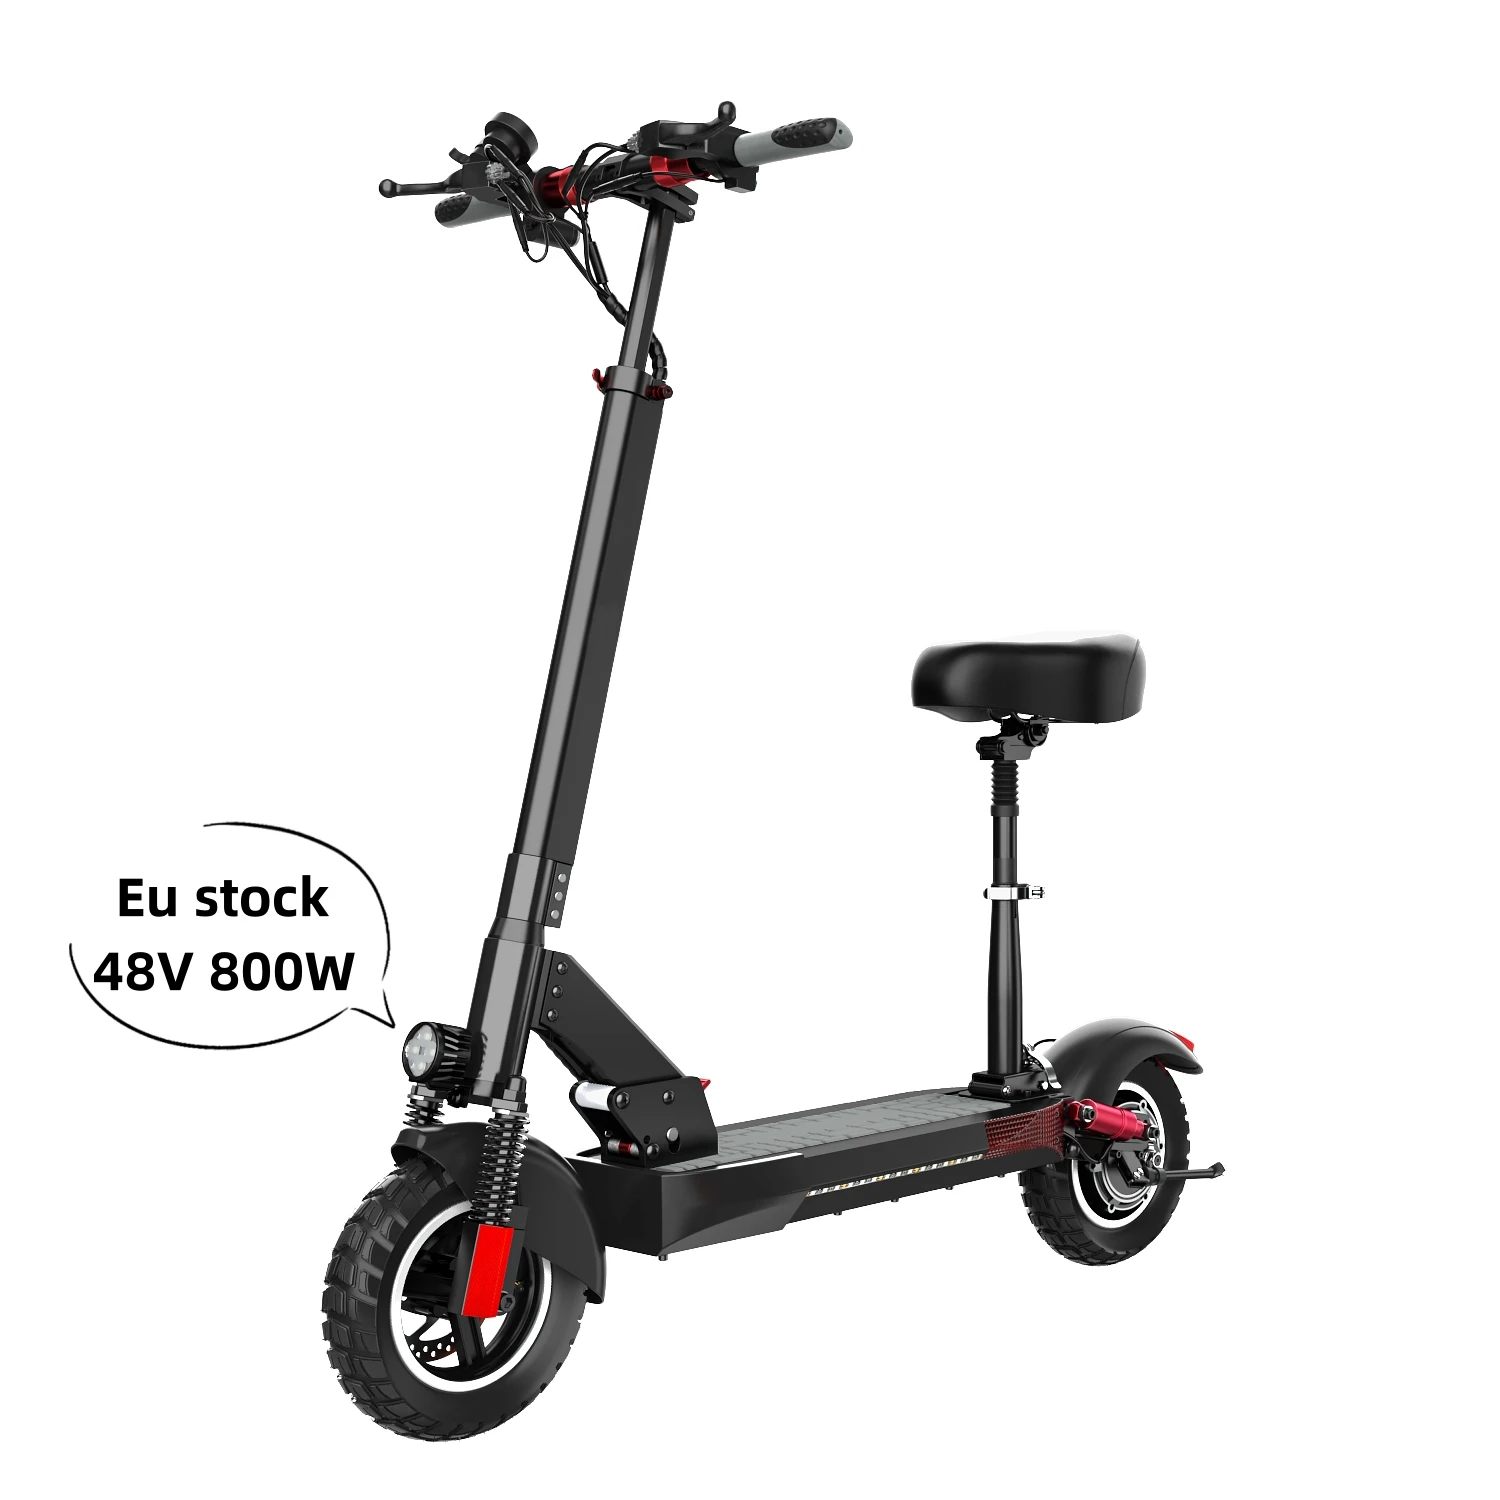 

48v electric scooter 30 mph 800w dual motor foldable max speed 45km/h 10inch tire e scooter stock in EU warehouse